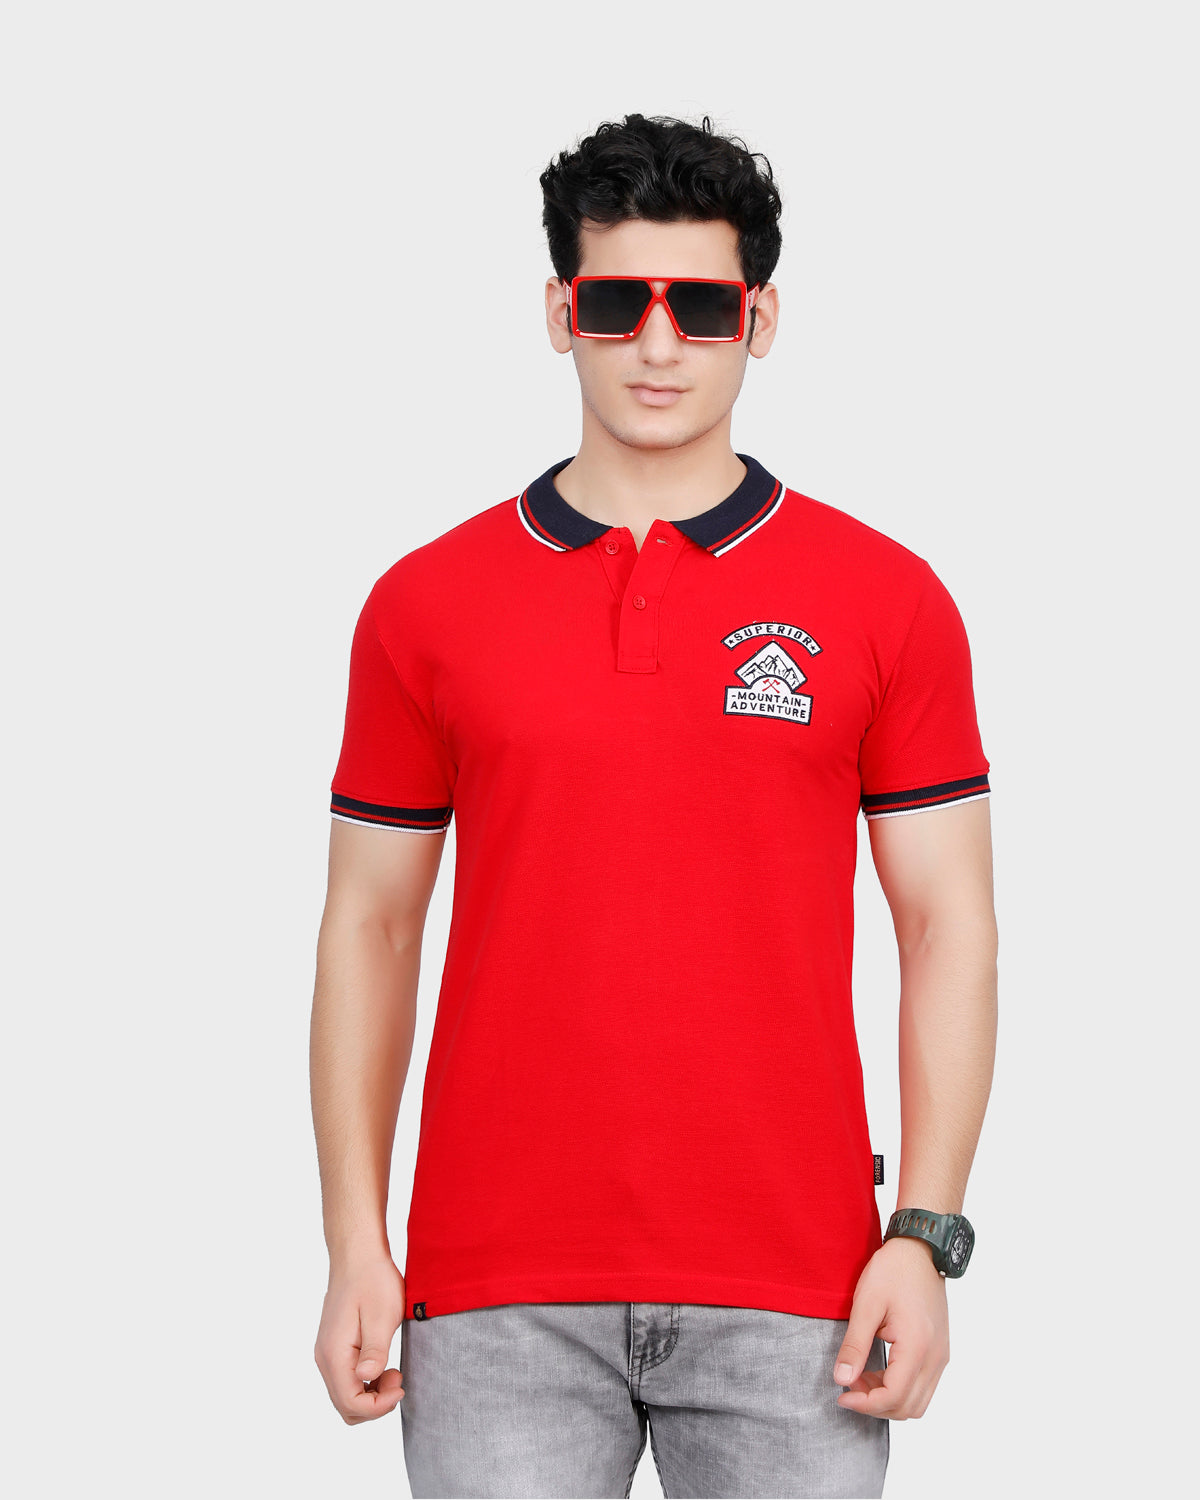 Men's Red Solid Cotton Polo Shirt